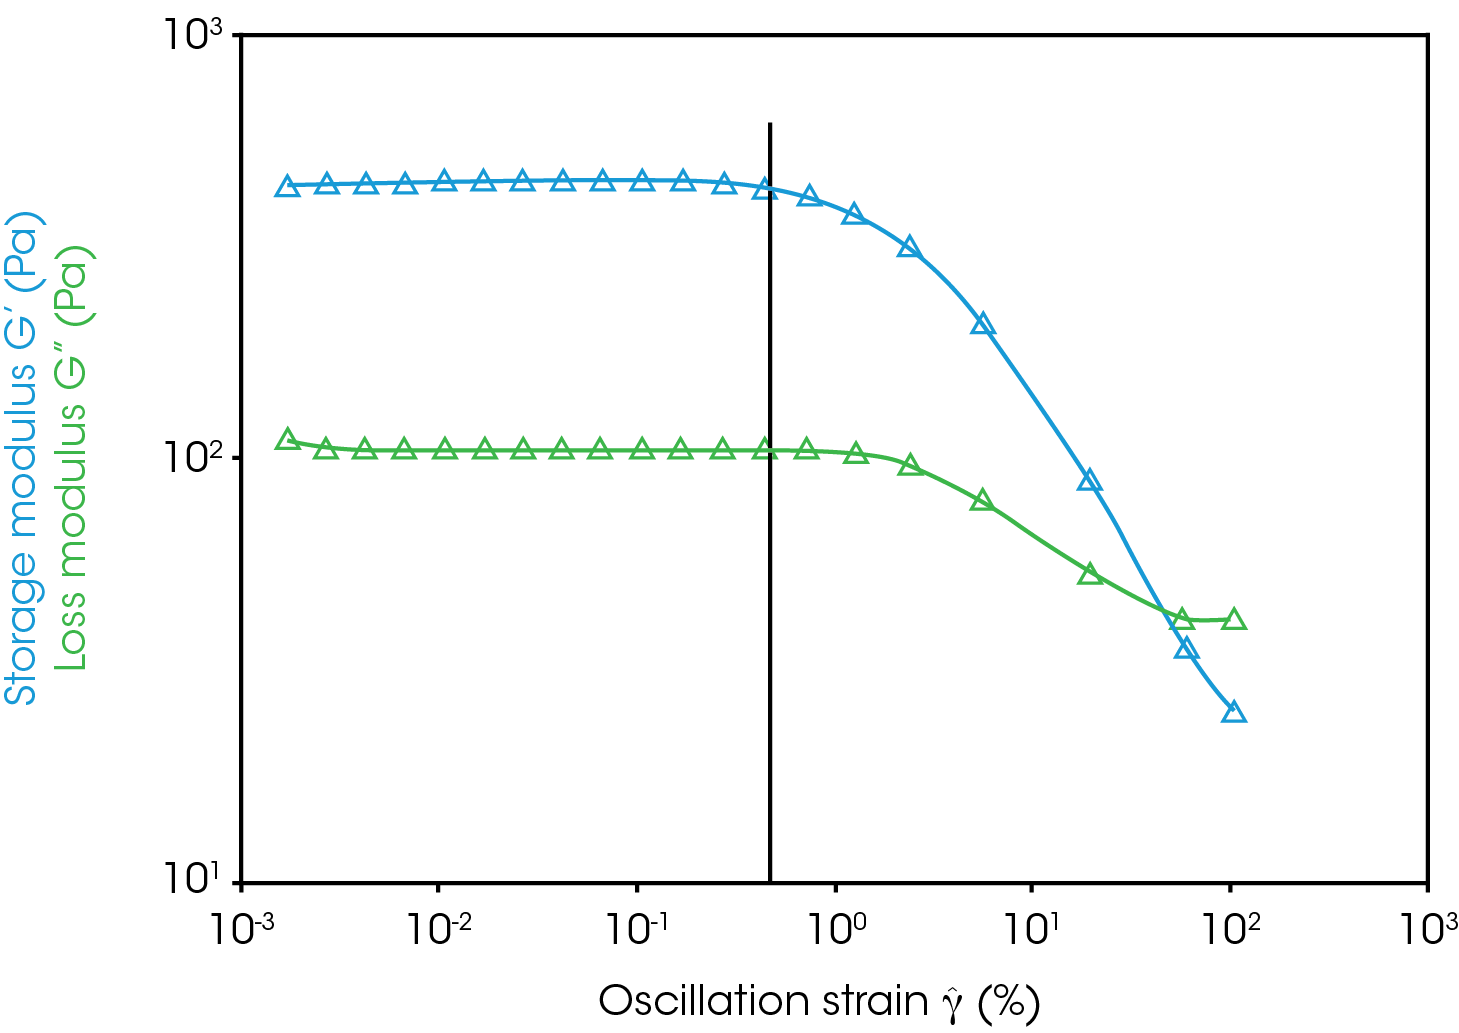 Figure 6. Amplitude sweep on plain non-fat Greek yogurt sample at 4 °C and 1 Hz. The linear viscoelastic region may be determined from this measurement. The end of the linear viscoelastic region is the critical strain and is marked on the graph at about 0.5% strain.